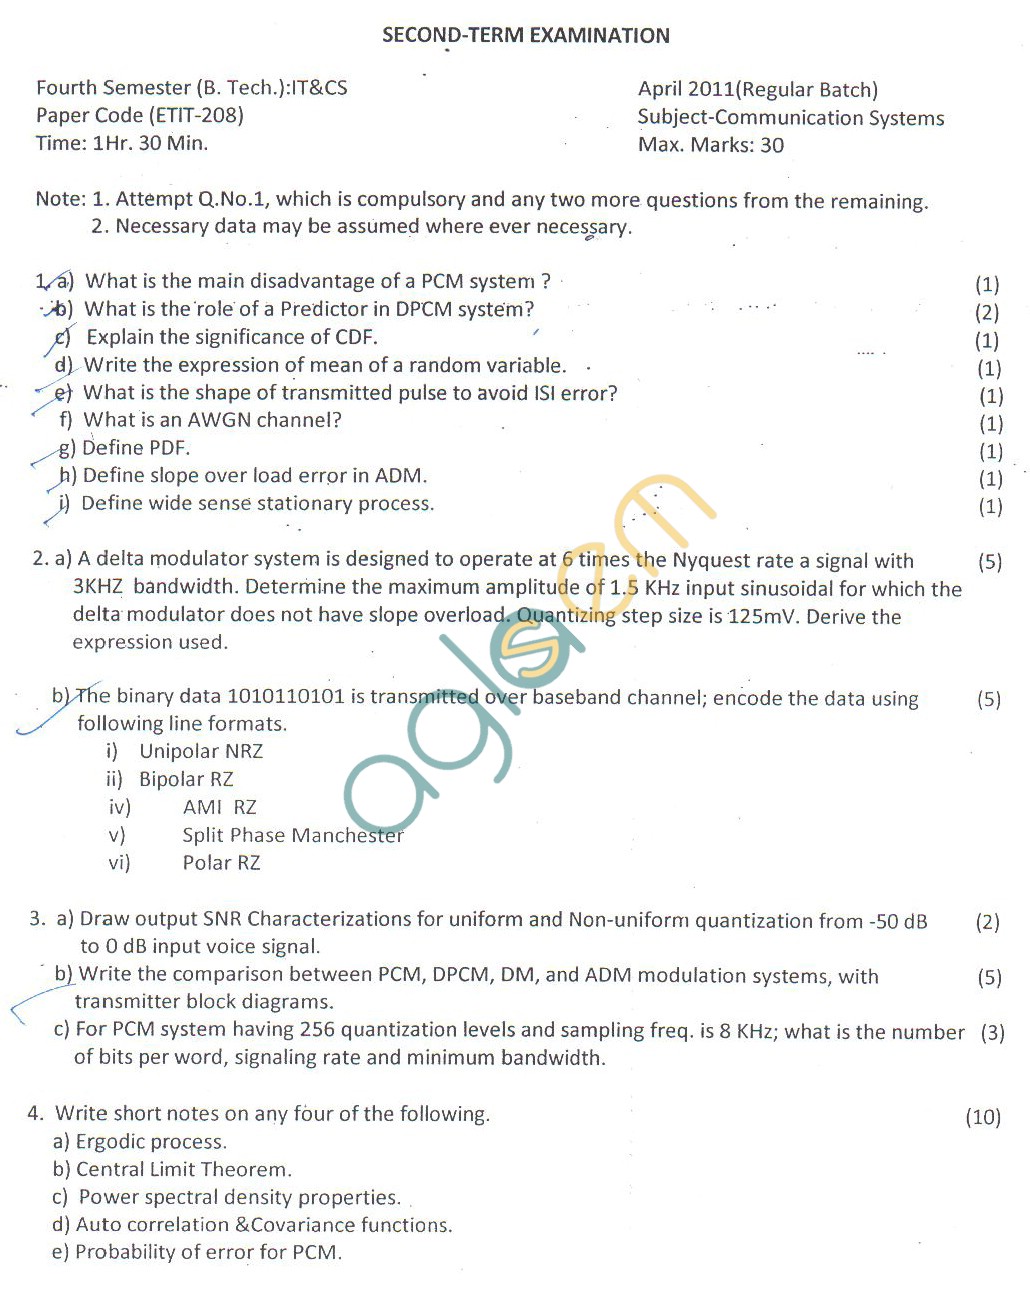 GGSIPU Question Papers Fourth Semester  Second Term 2011  ETIT-208